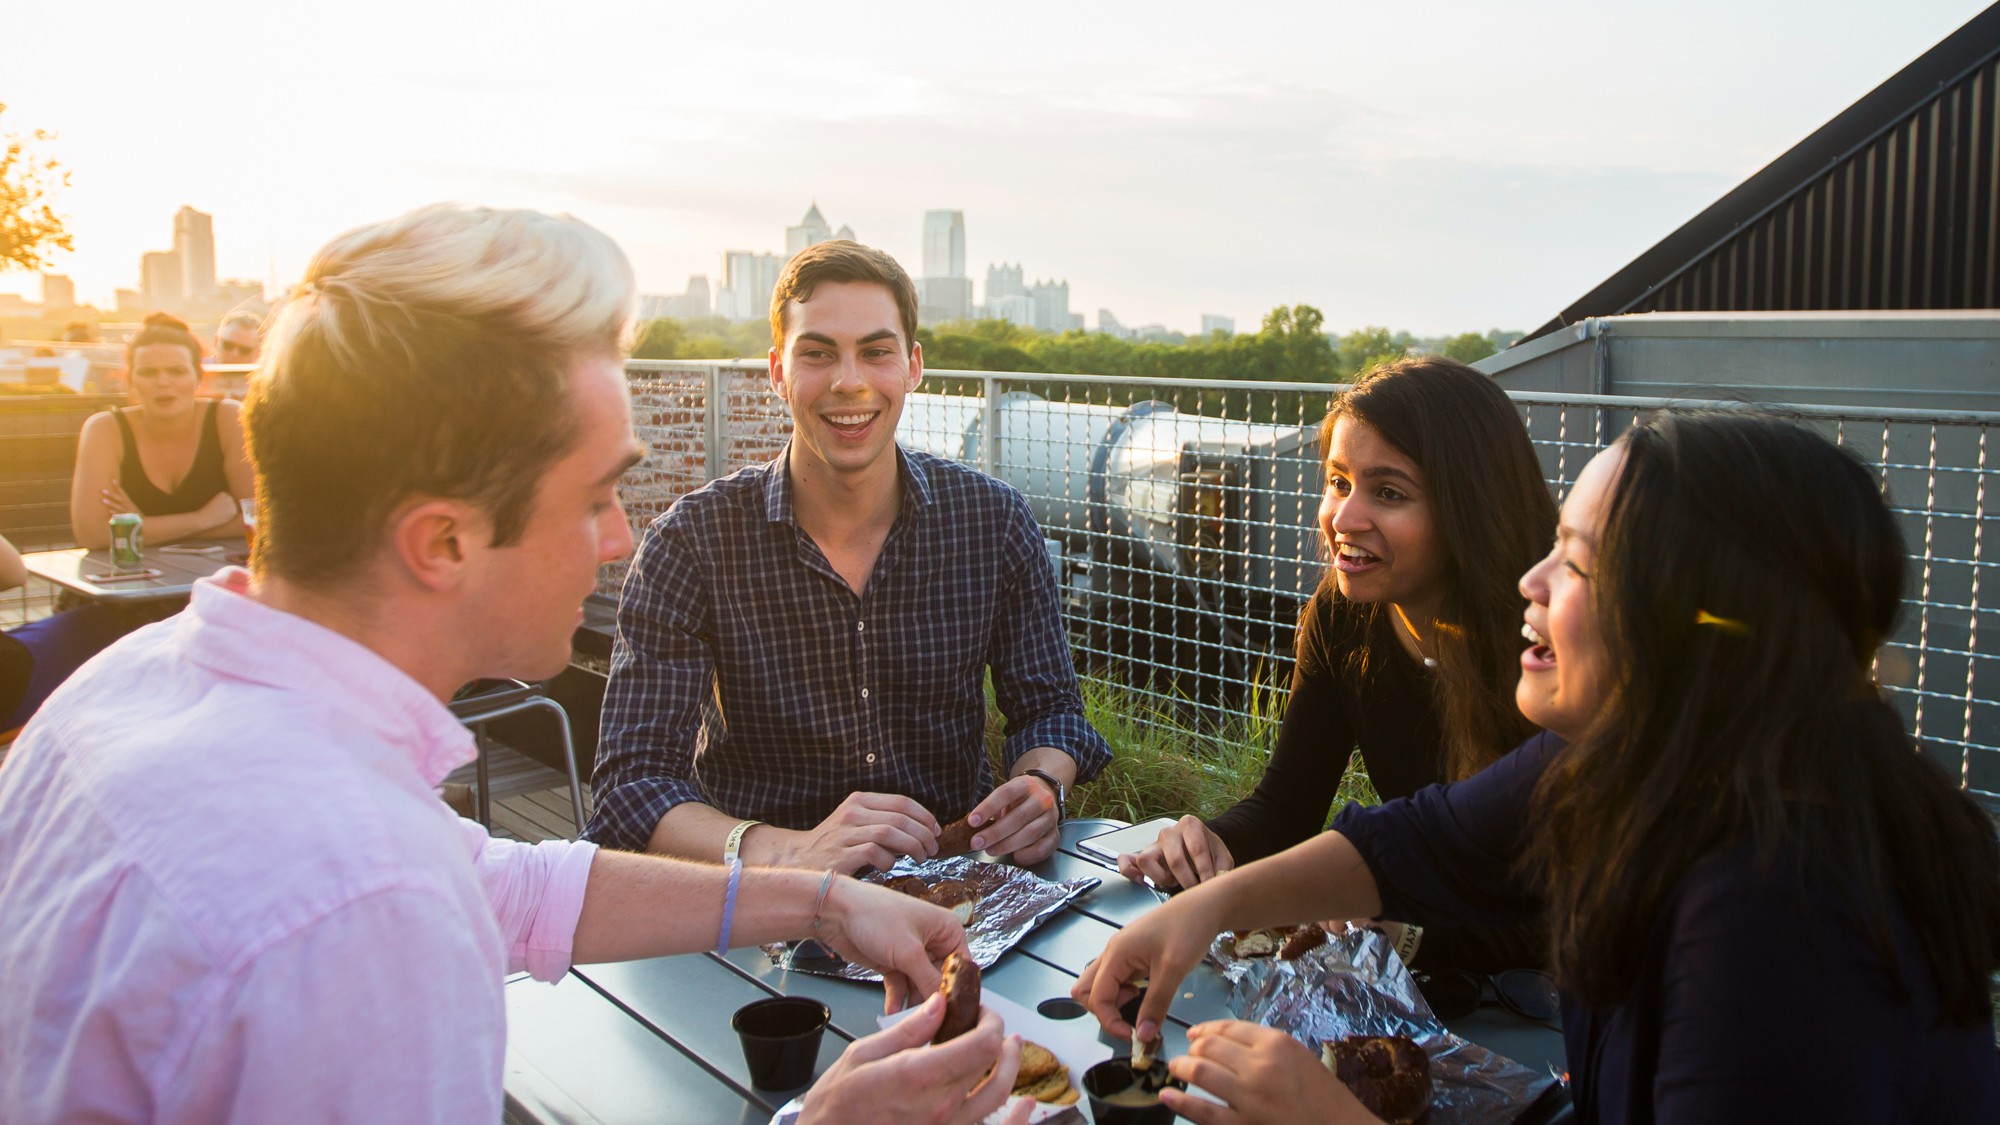 Group of people on a rooftop eating and talking